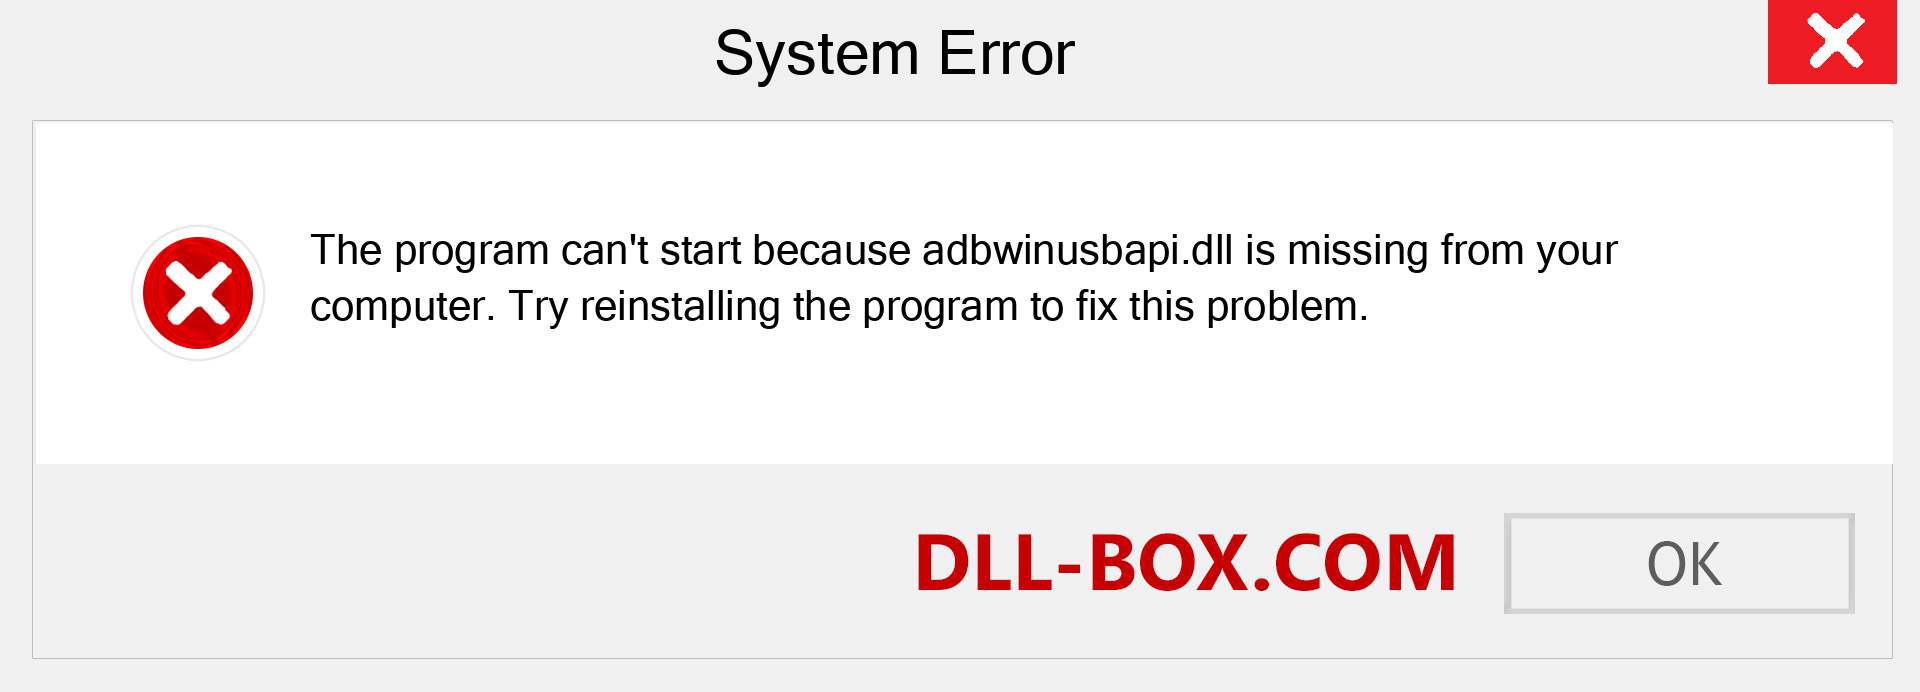  adbwinusbapi.dll file is missing?. Download for Windows 7, 8, 10 - Fix  adbwinusbapi dll Missing Error on Windows, photos, images